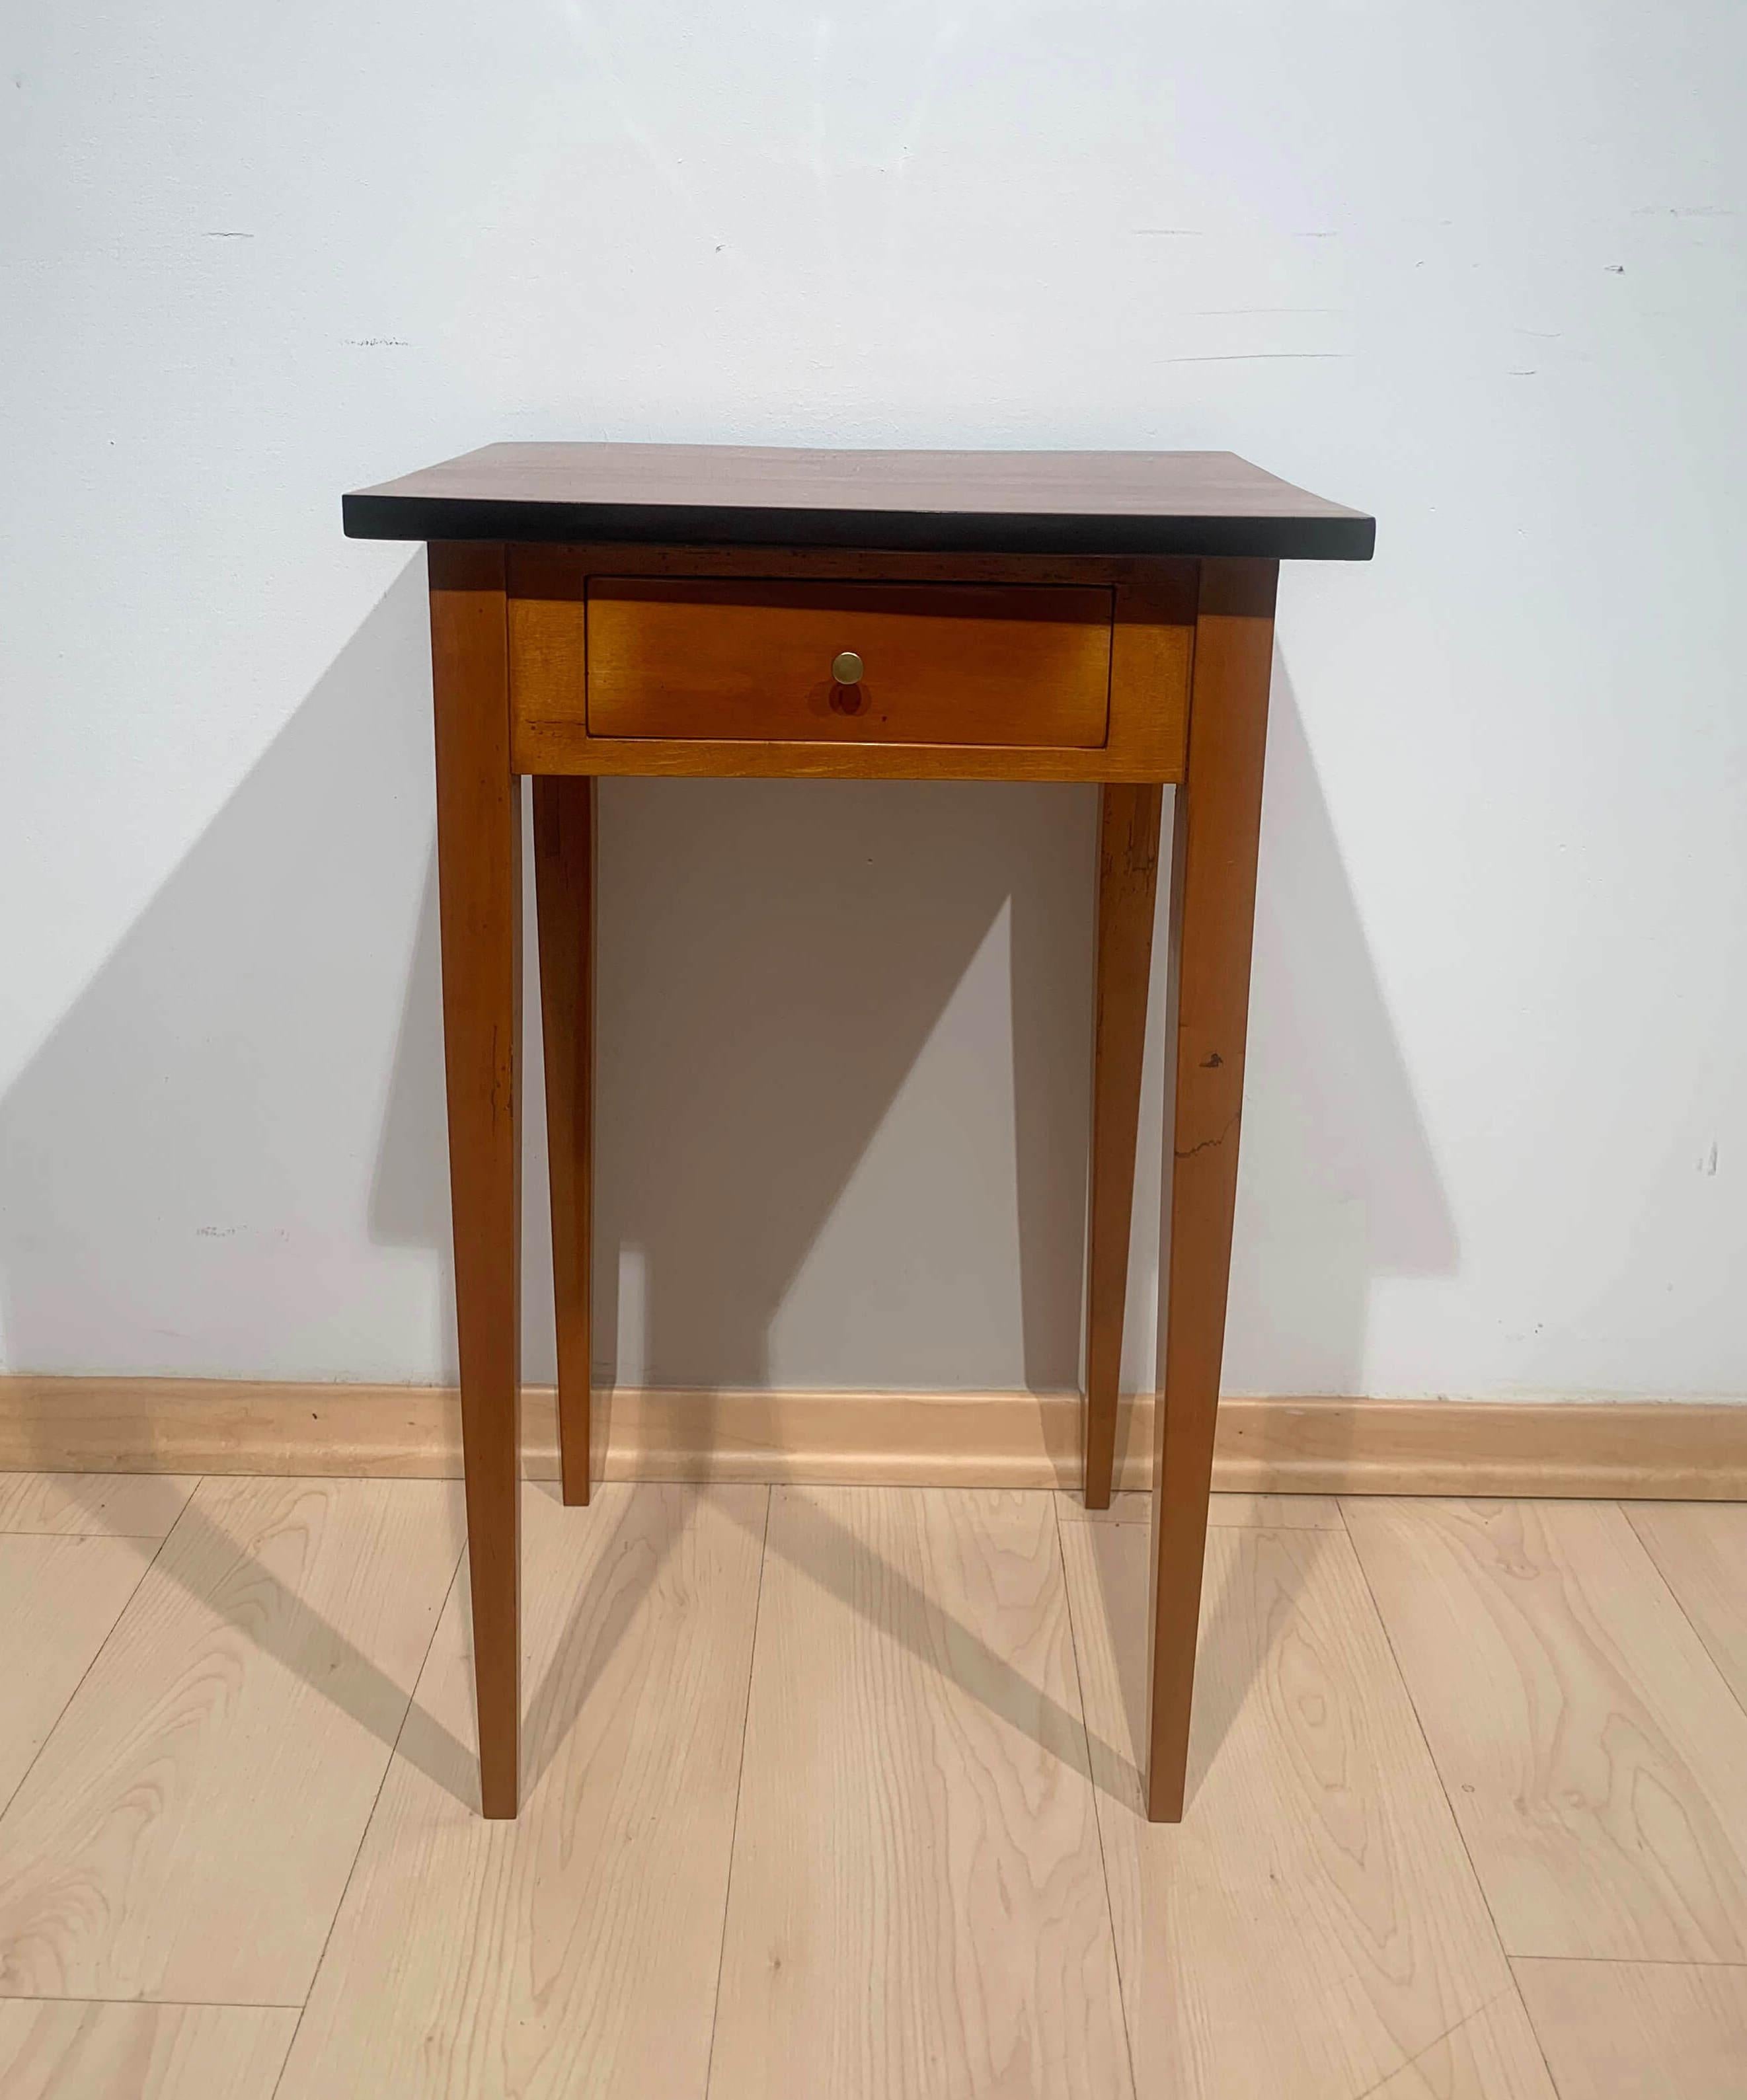 Biedermeier side table with drawer, cherry wood, South Germany circa 1830

Small, plain Biedermeier side table with drawer from South Germany around 1830.
Cherry veneered on softwood and solid beech. Restored with french polished surface.